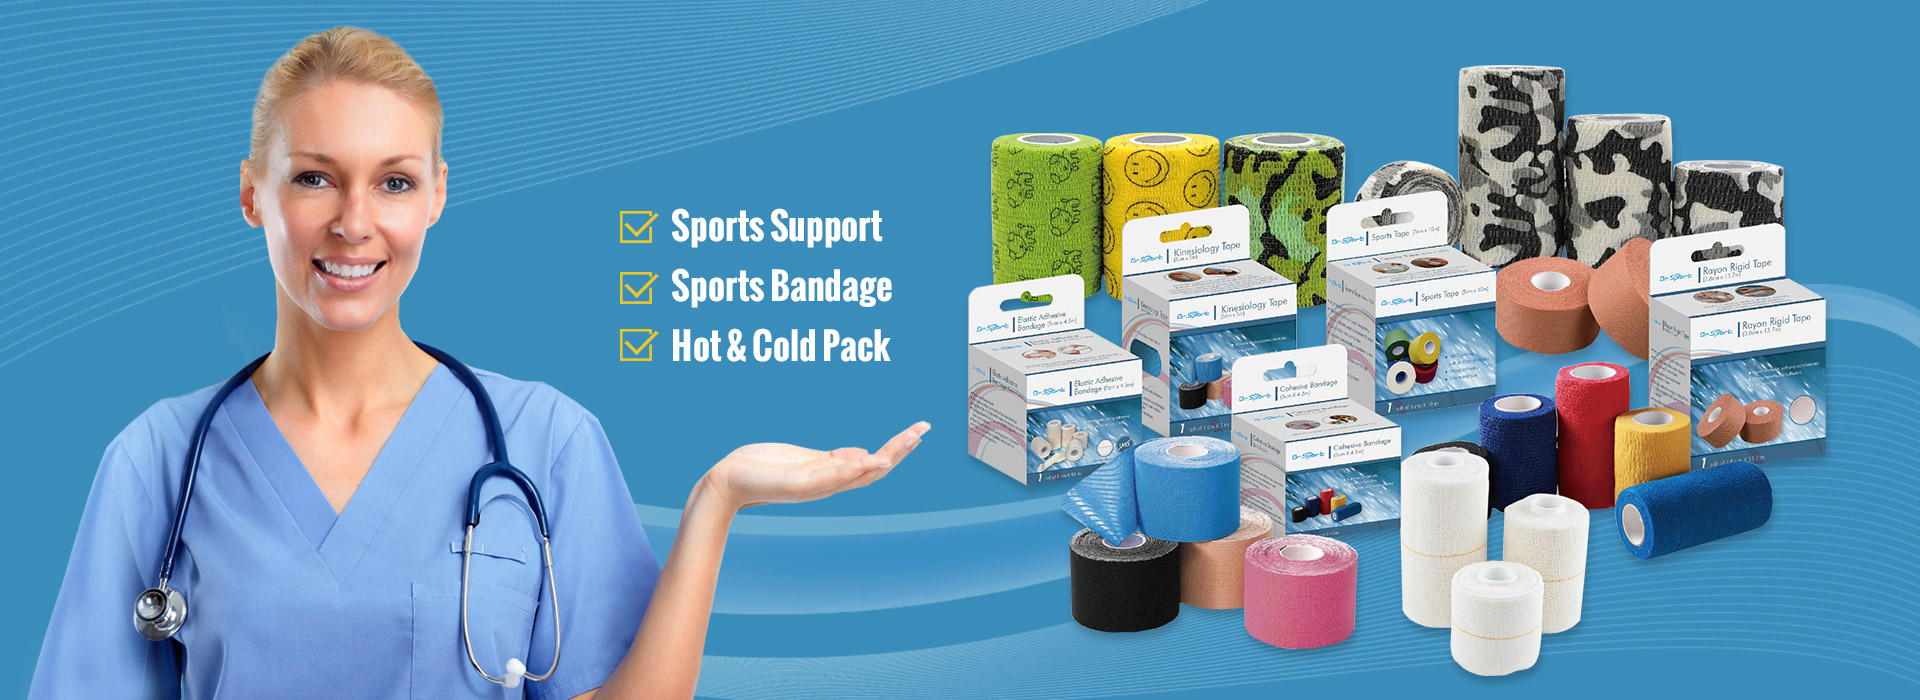 sport support